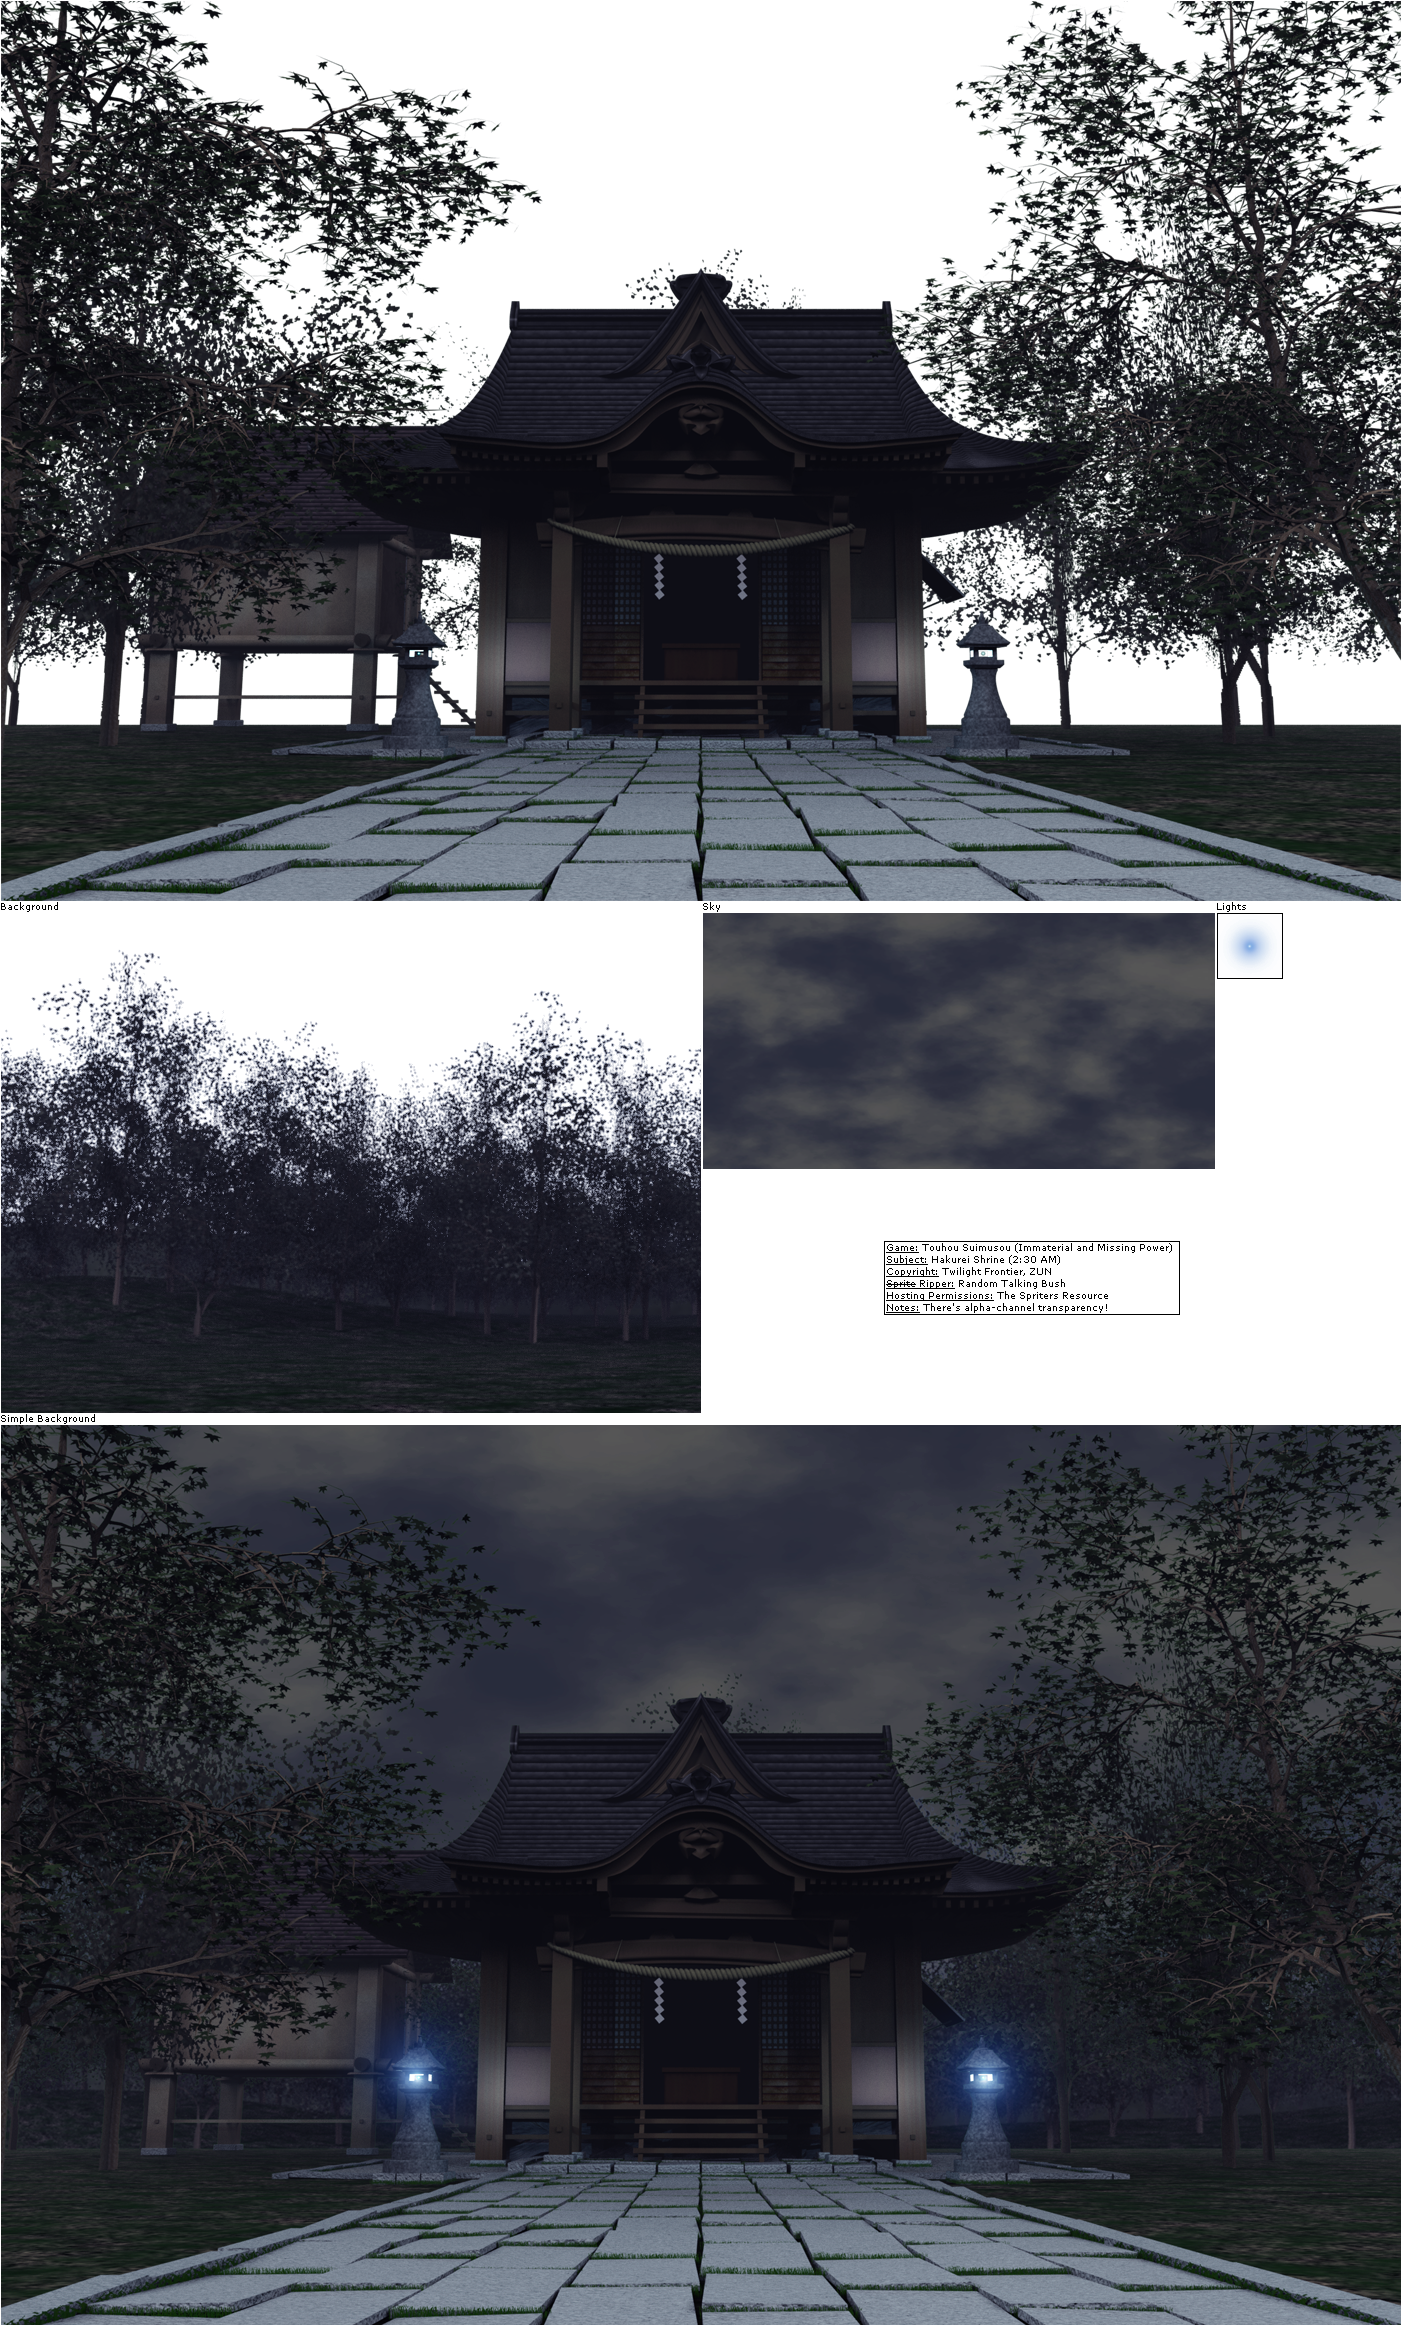 Touhou Suimusou (Immaterial and Missing Power) - Hakurei Shrine (2:30 AM)